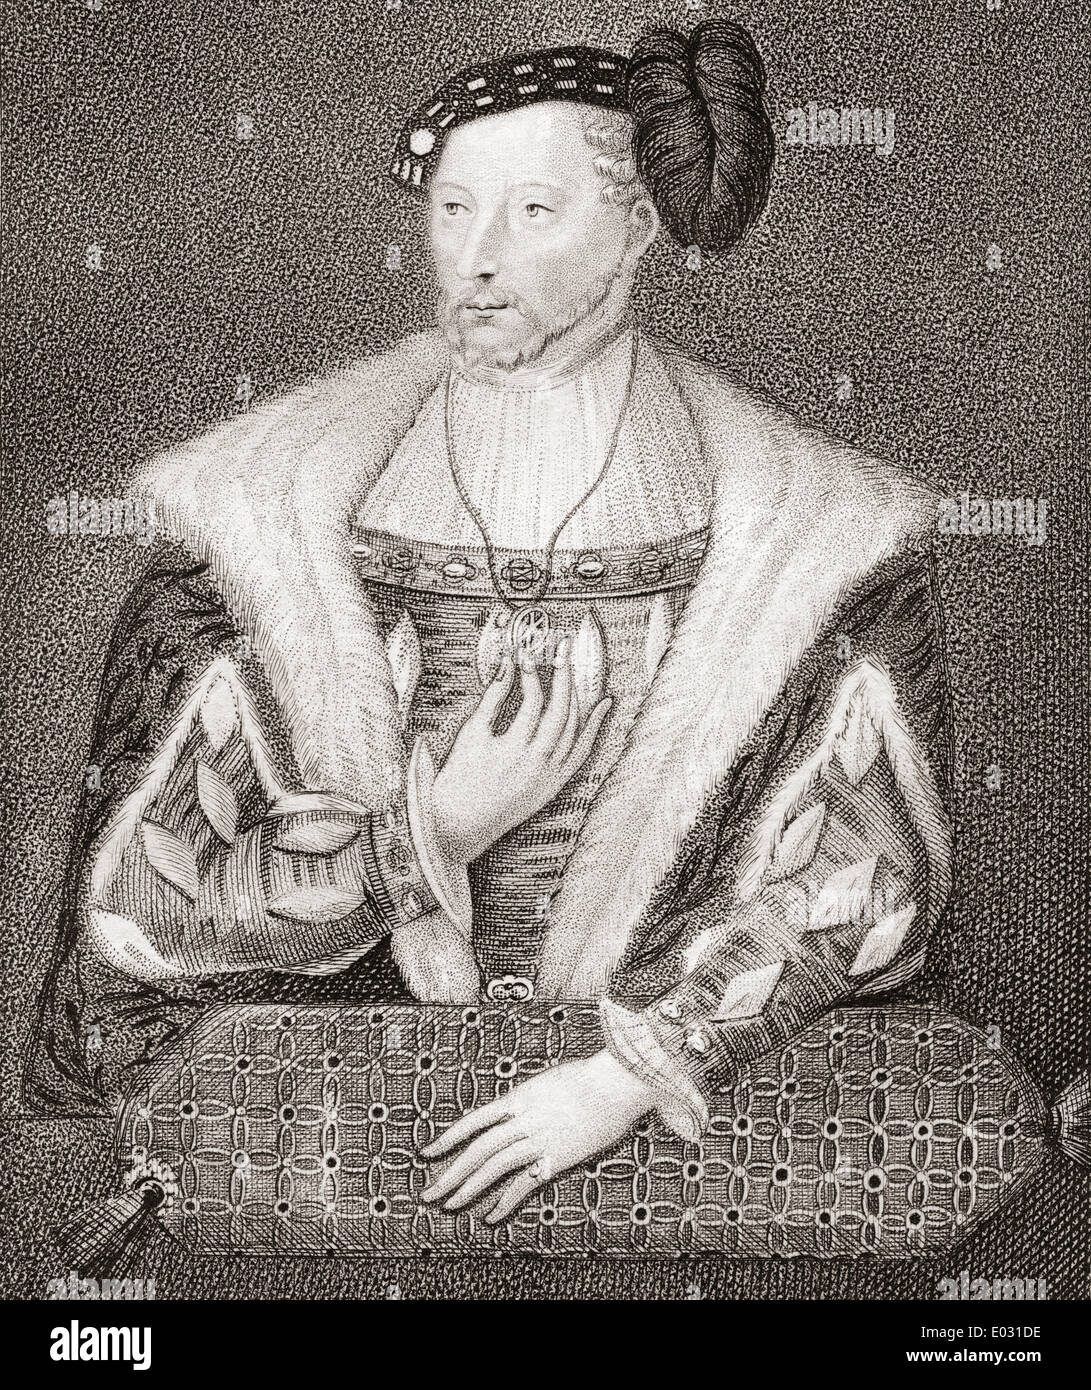 James V, King of Scots, 1512 – 1542. From Iconographia Scotica or Portraits of Illustrious Persons of Scotland, published 1797. Stock Photo